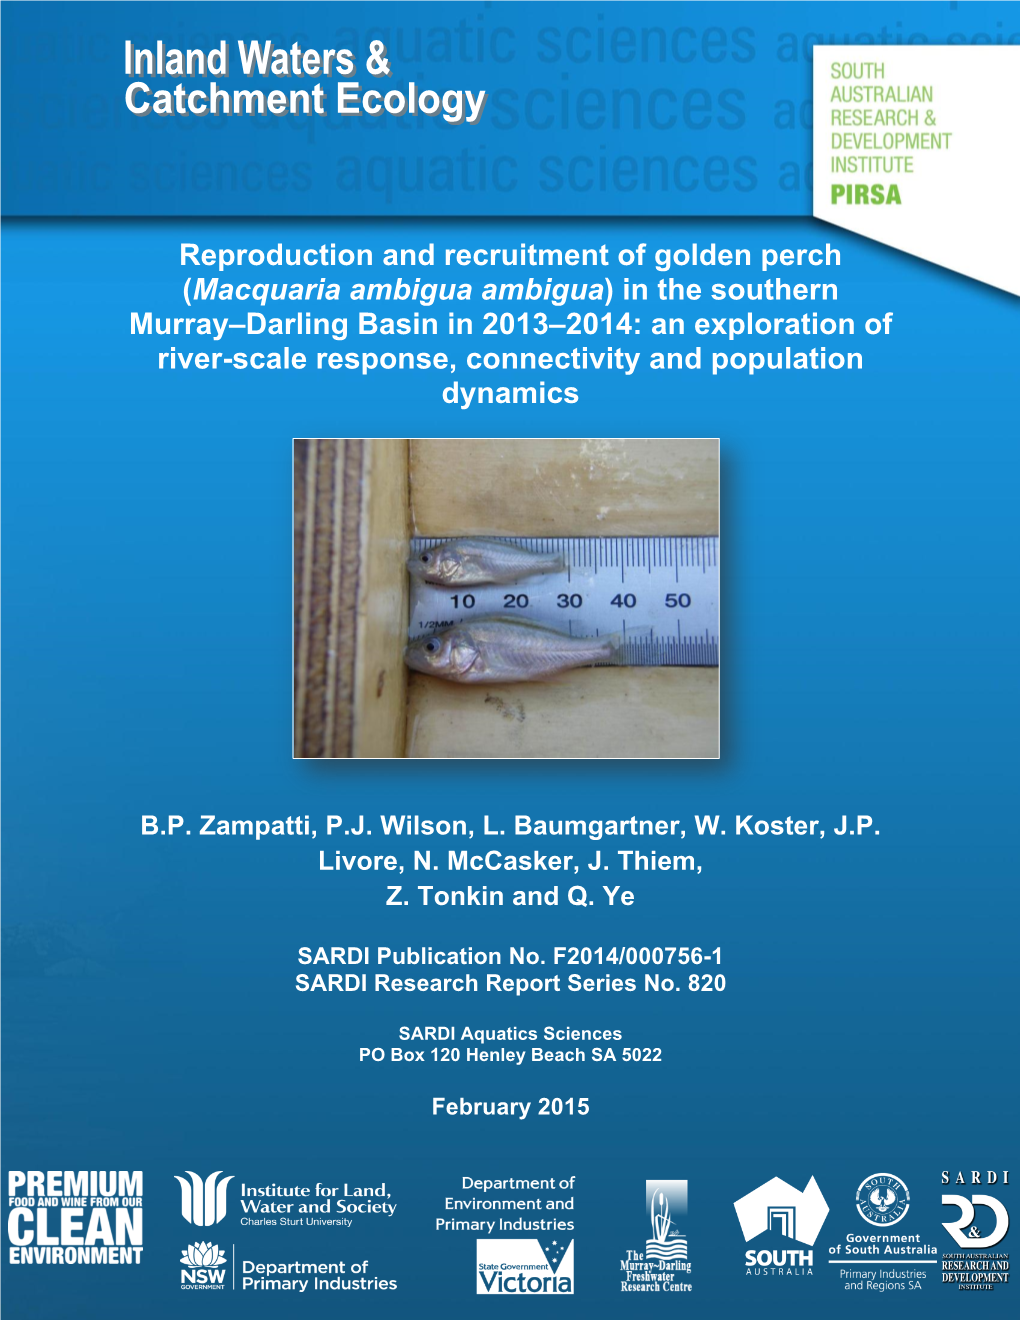 Reproduction and Recruitment of Golden Perch (Macquaria Ambigua Ambigua) in the Southern Murray–Darling Basin in 2013–2014